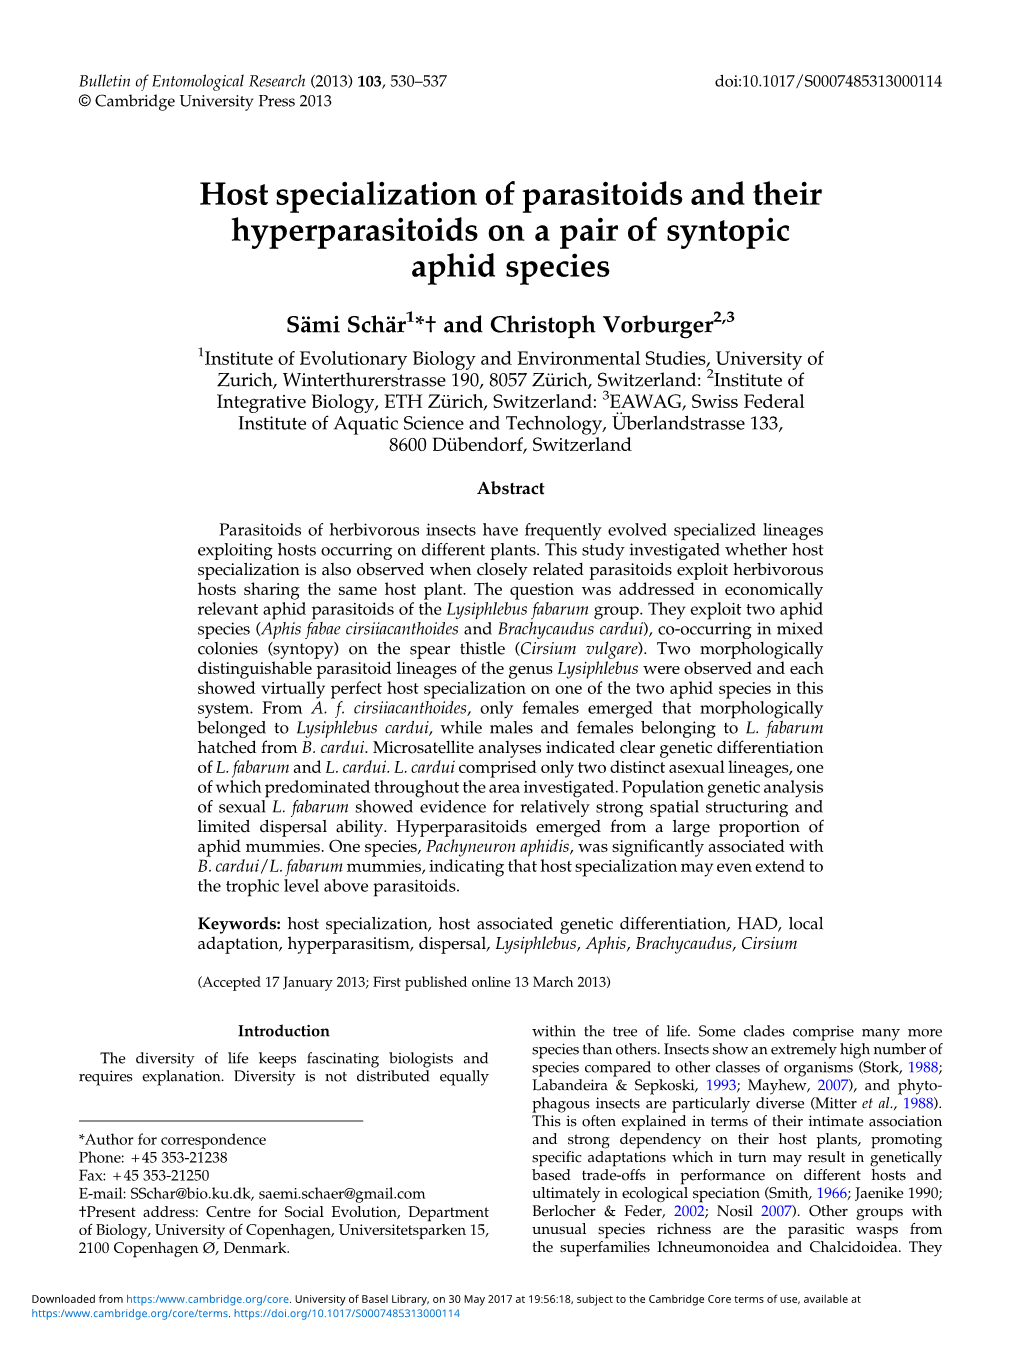 Host Specialization of Parasitoids and Their Hyperparasitoids on a Pair of Syntopic Aphid Species